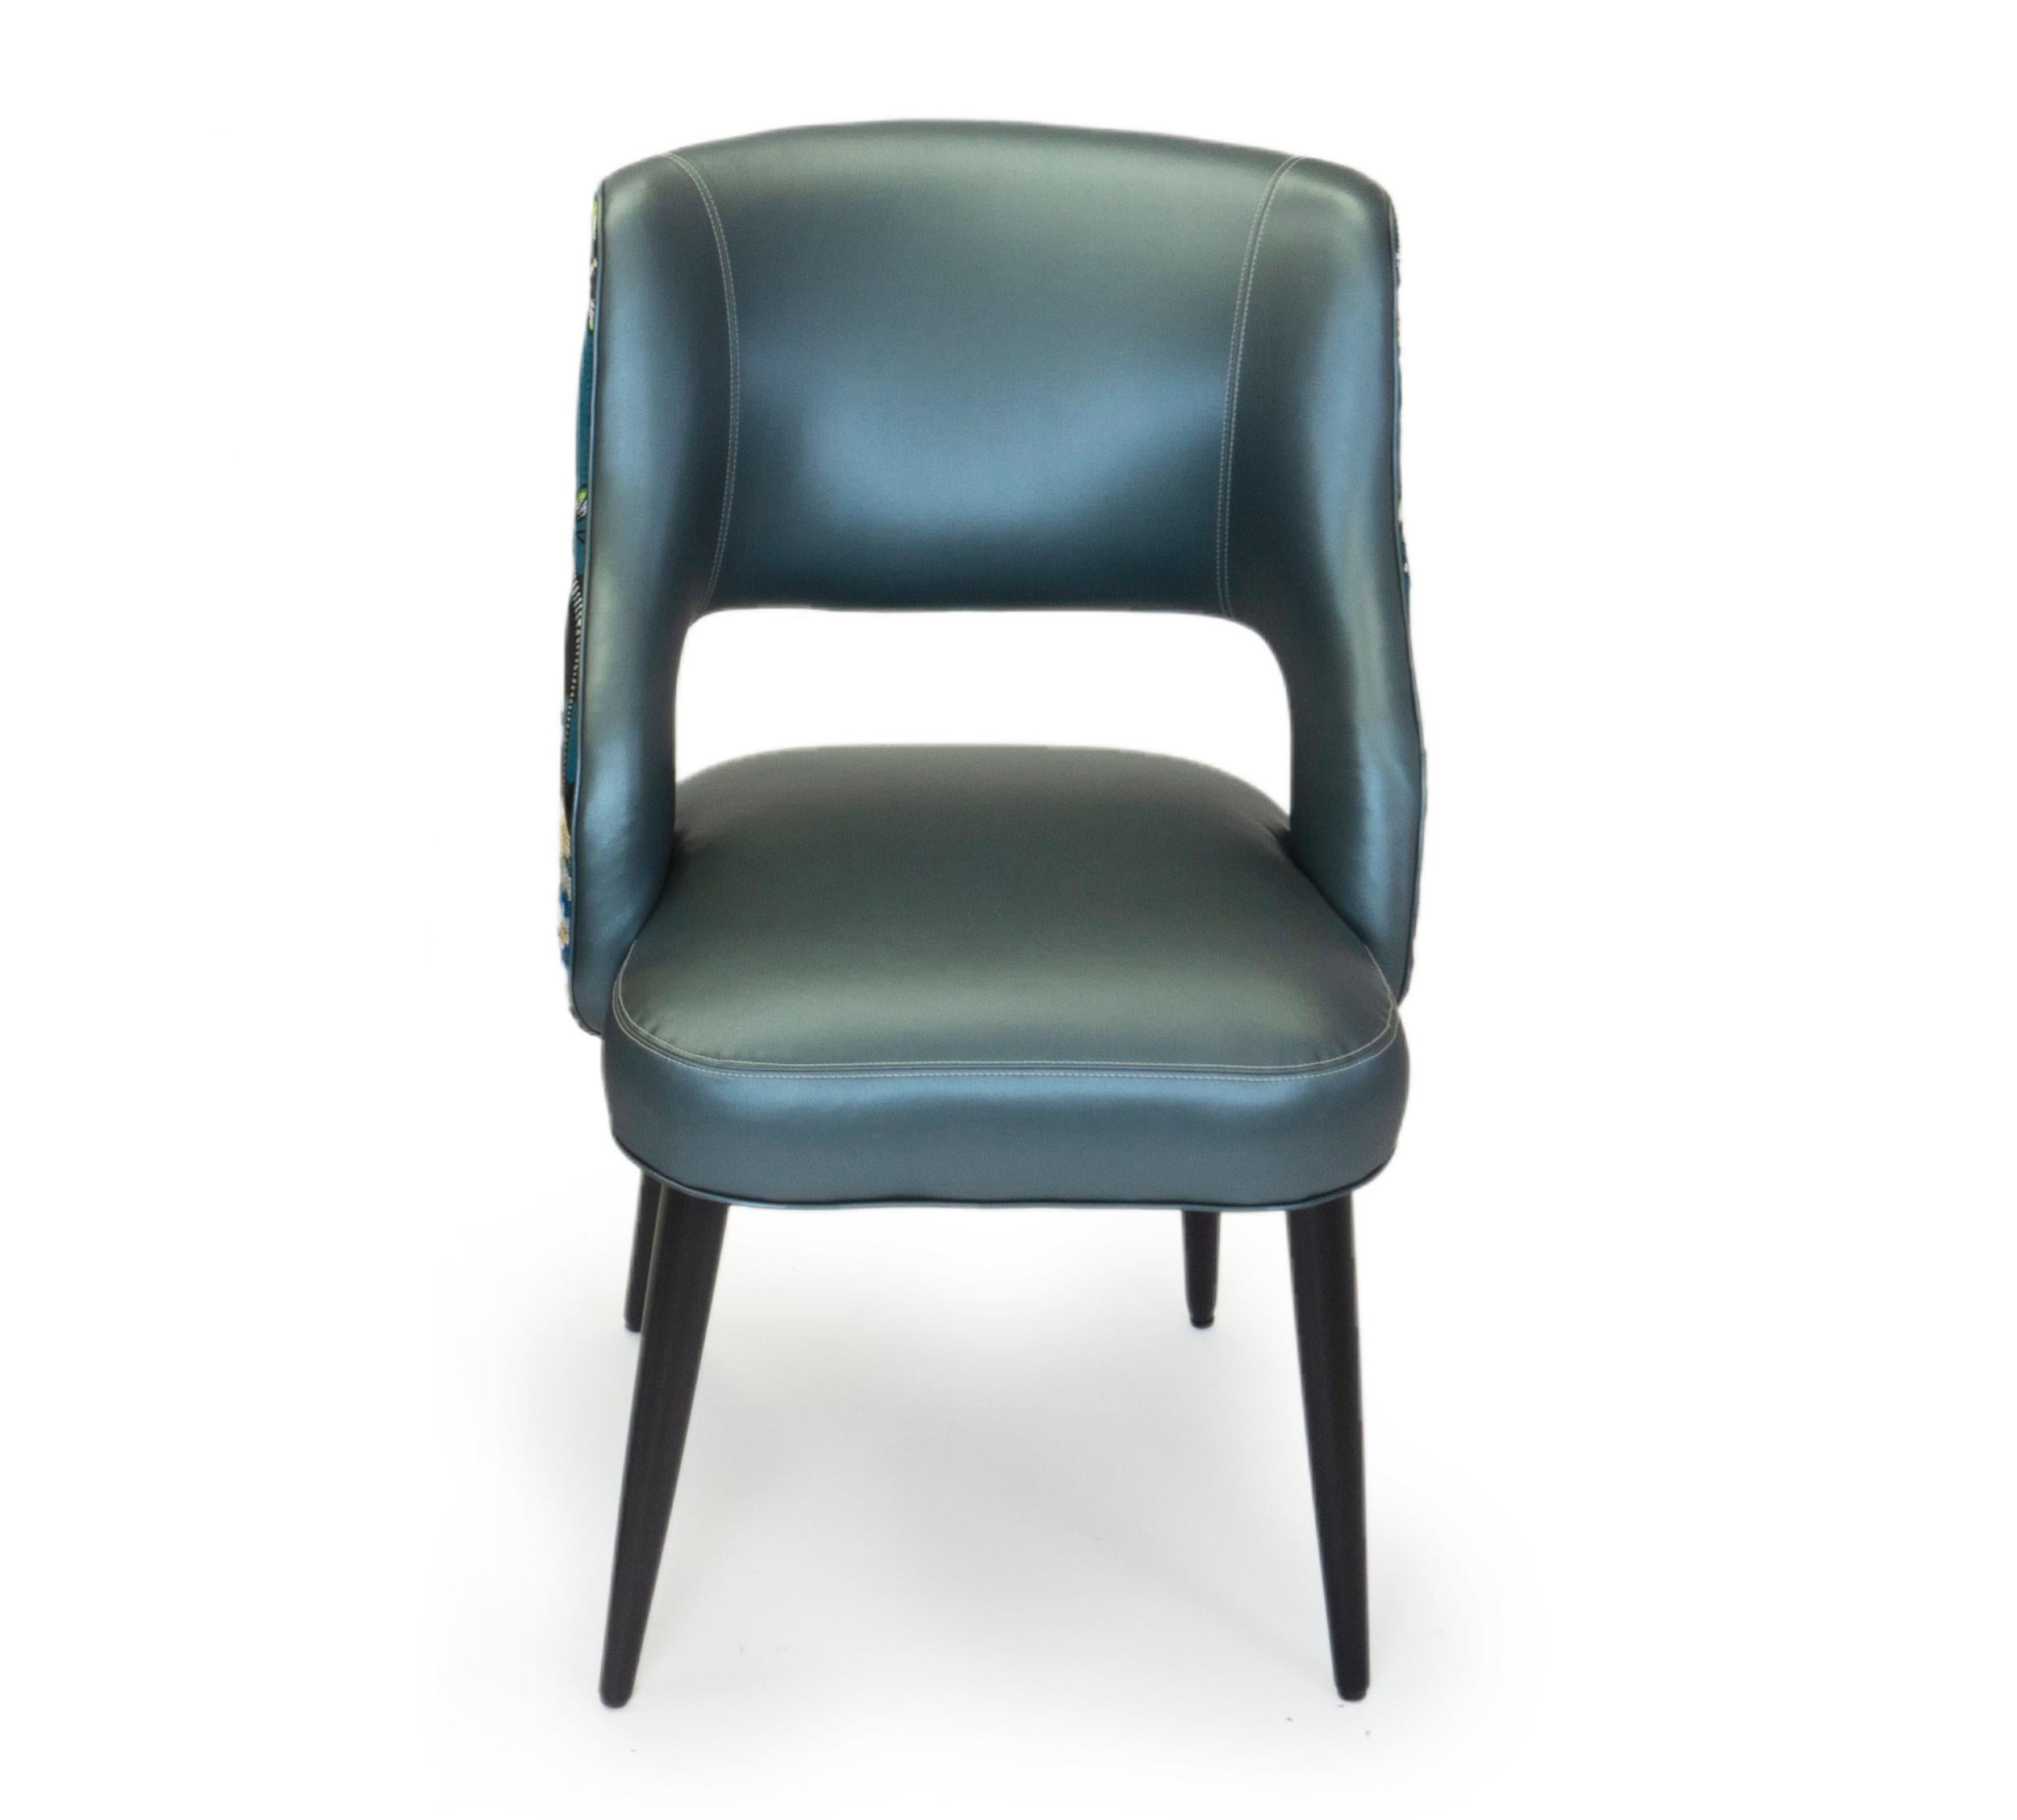 This new dining chair design is comfortable and modern with a relaxed pitch. The chairs shown feature a walnut finish and are covered in a blue vinyl. The back is a Christian Lacroix fabric featuring a vivid floral design with metallic thread